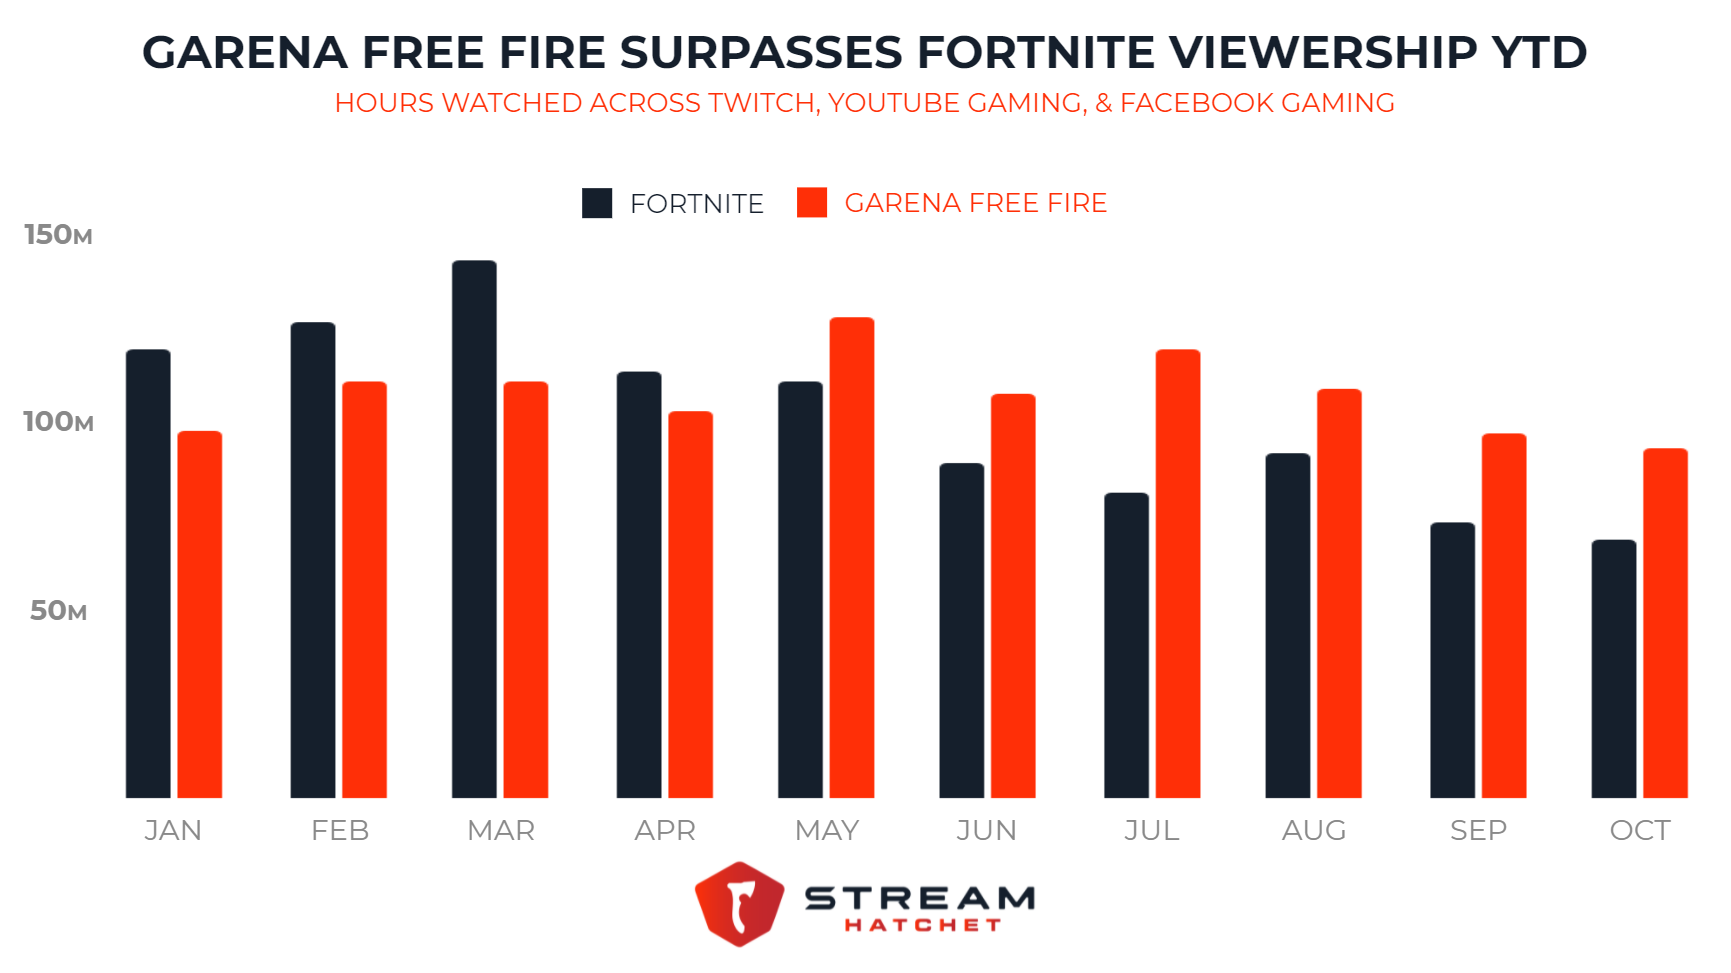 Free Fire has been nominated for the - Garena Free Fire